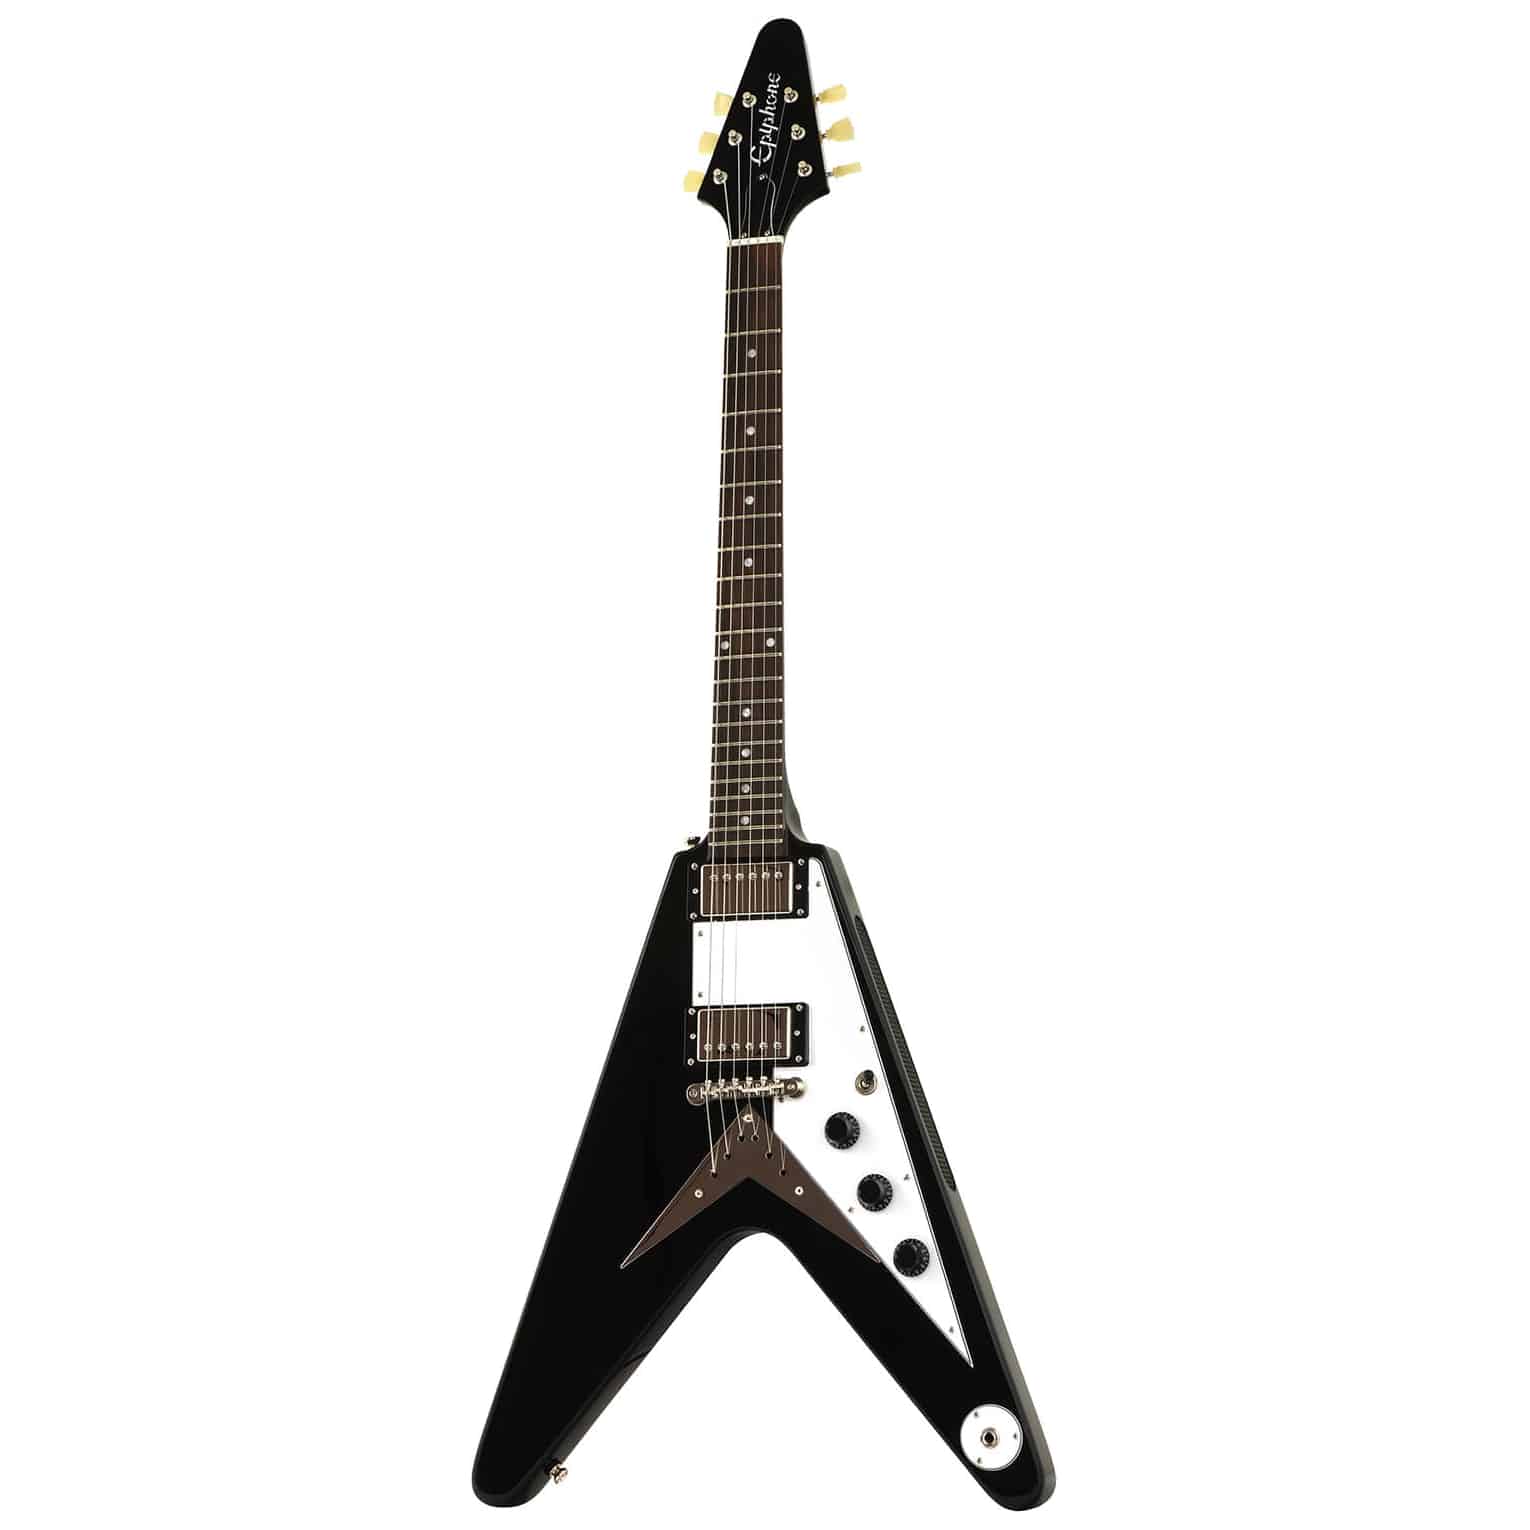 Epiphone Inspired by Gibson Flying V EB